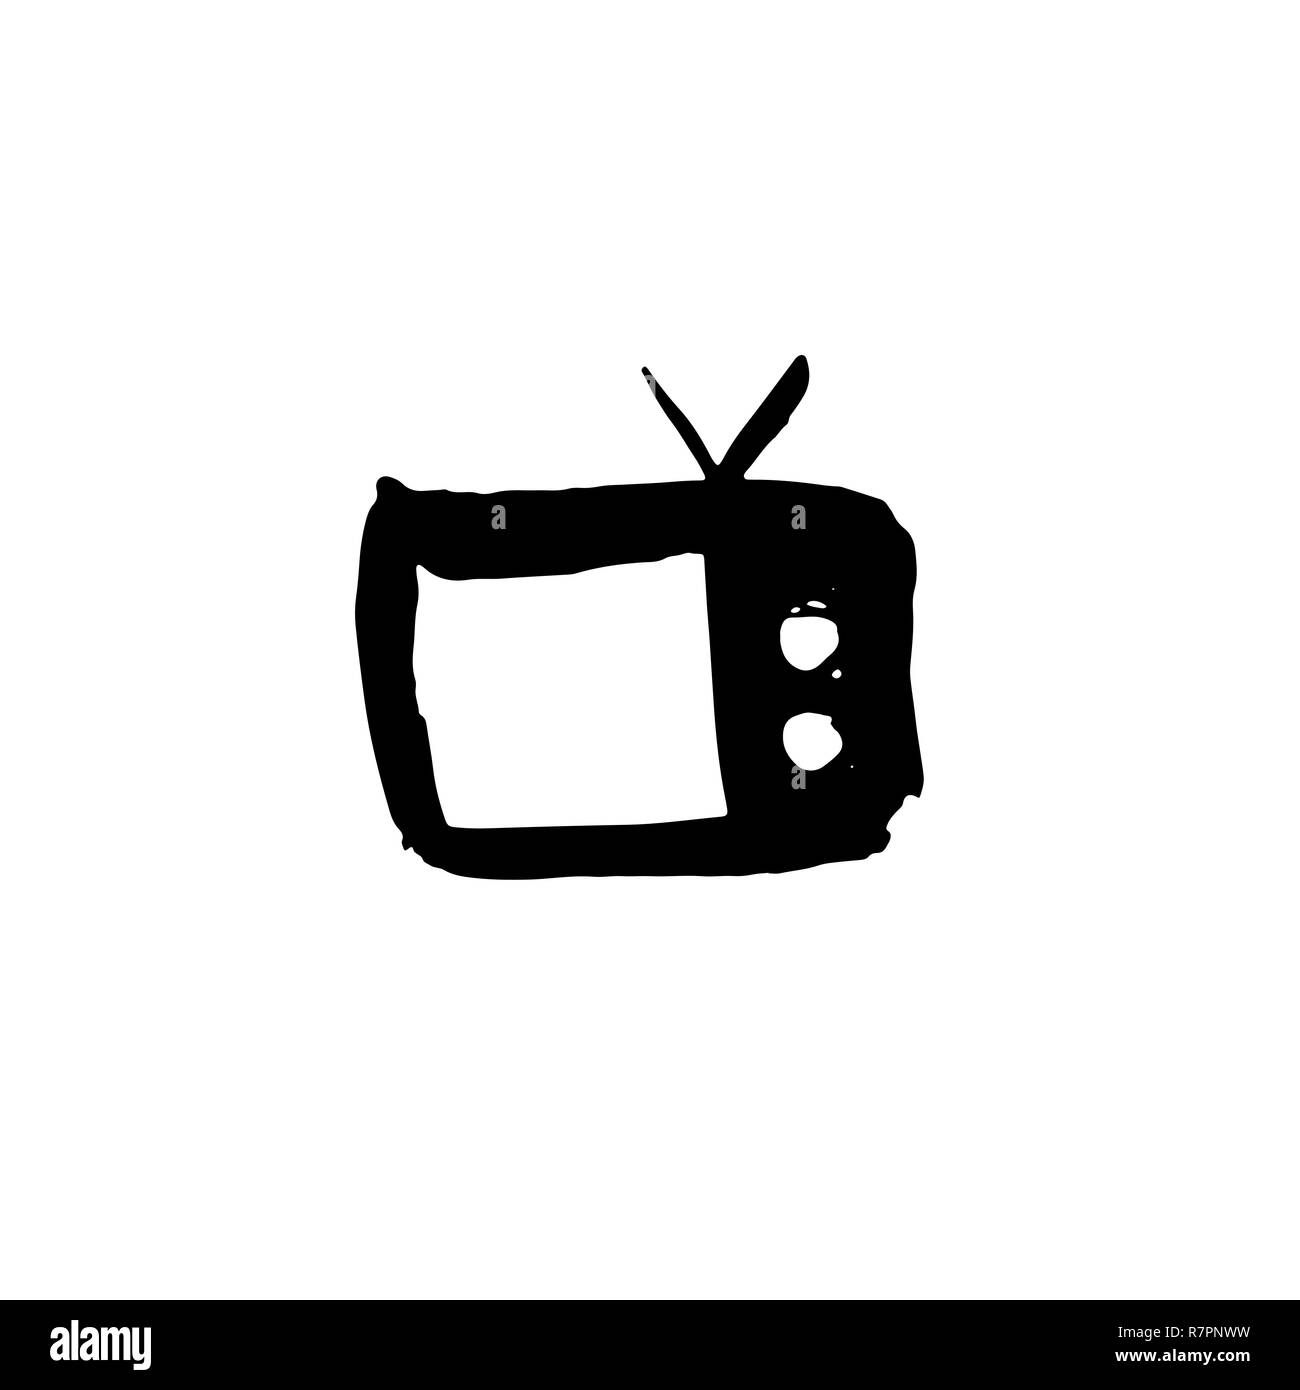 Tv grunge icon. Television watercolor brush vector illustration. Stock Vector